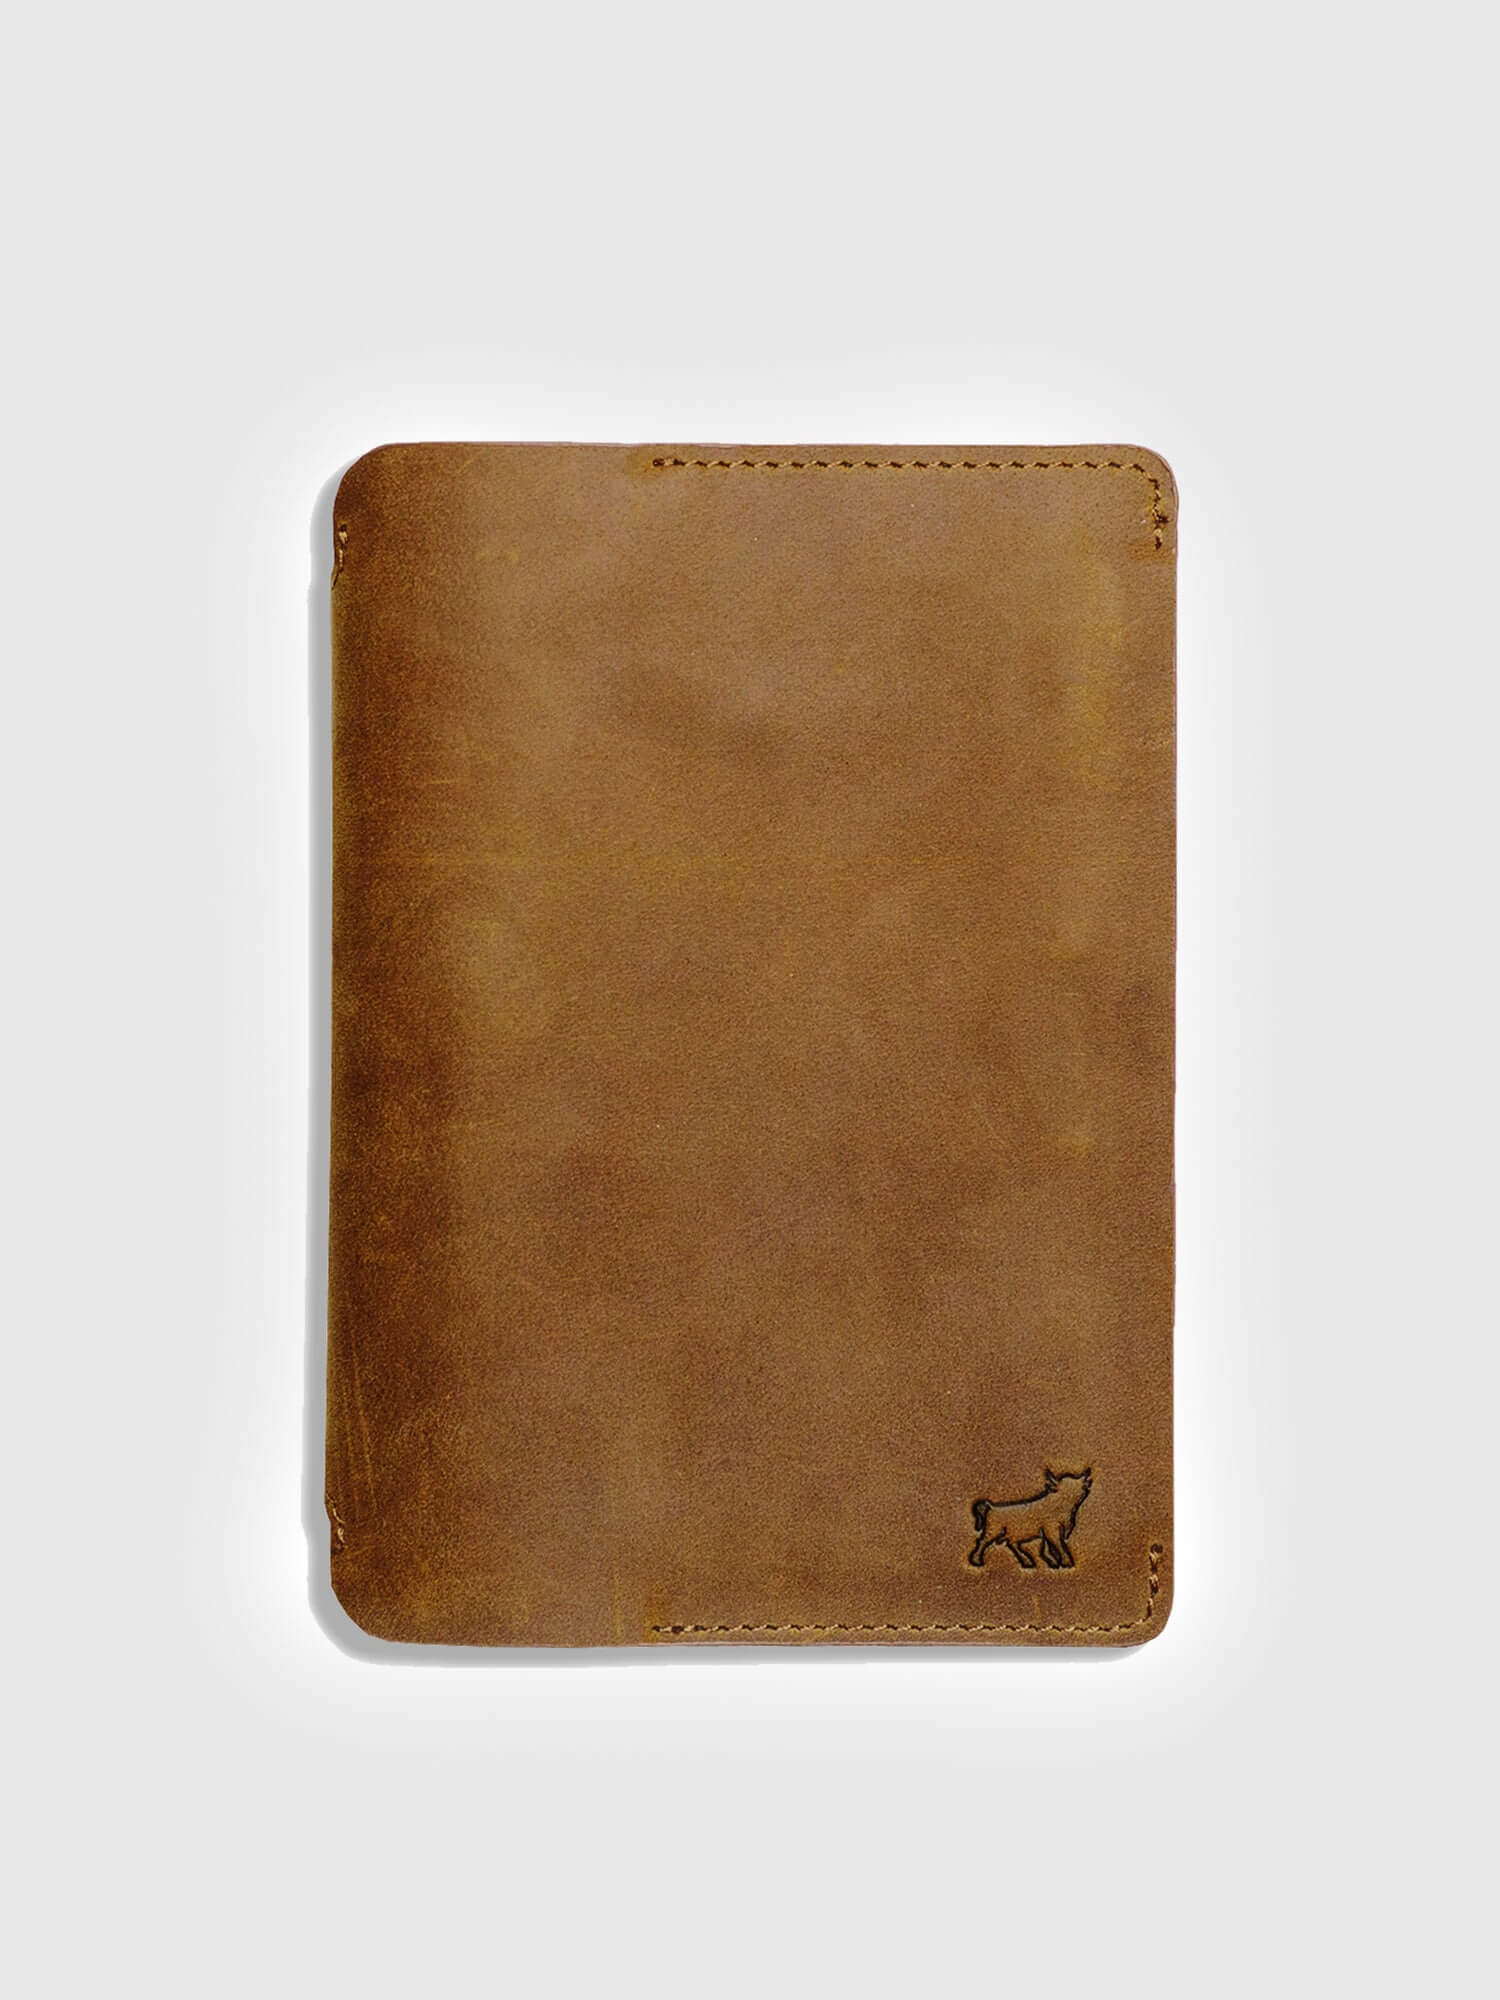 Market Notebook – Leather Cover